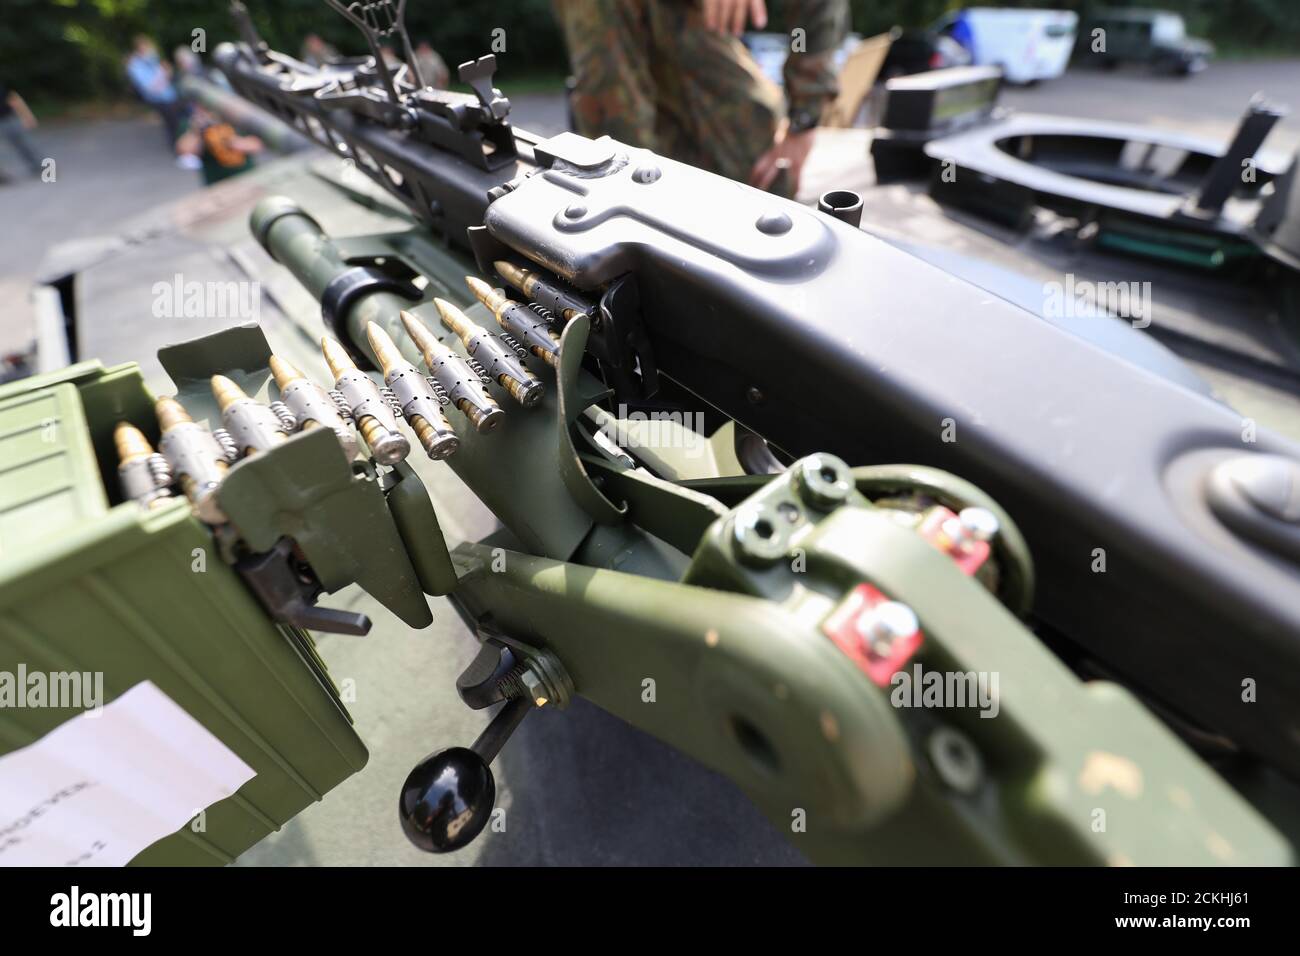 16 September 2020, North Rhine-Westphalia, Paderborn: A machine gun of the type MG3 (rapid fire rifle of the German weapon manufacturer Heckler & Koch using the cartridge 7.62 × 51 mm NATO) is mounted on a tank of the type Leopard 2A6M on the area of the Normandy barracks in Paderborn-Sennelager. German soldiers and representatives of the British armed forces in Germany train combat situations in a special combat simulation centre. The focus of the training weeks is the deployment of a tank platoon of both combat reconnaissance units. This makes it one of the most demanding operations of armou Stock Photo